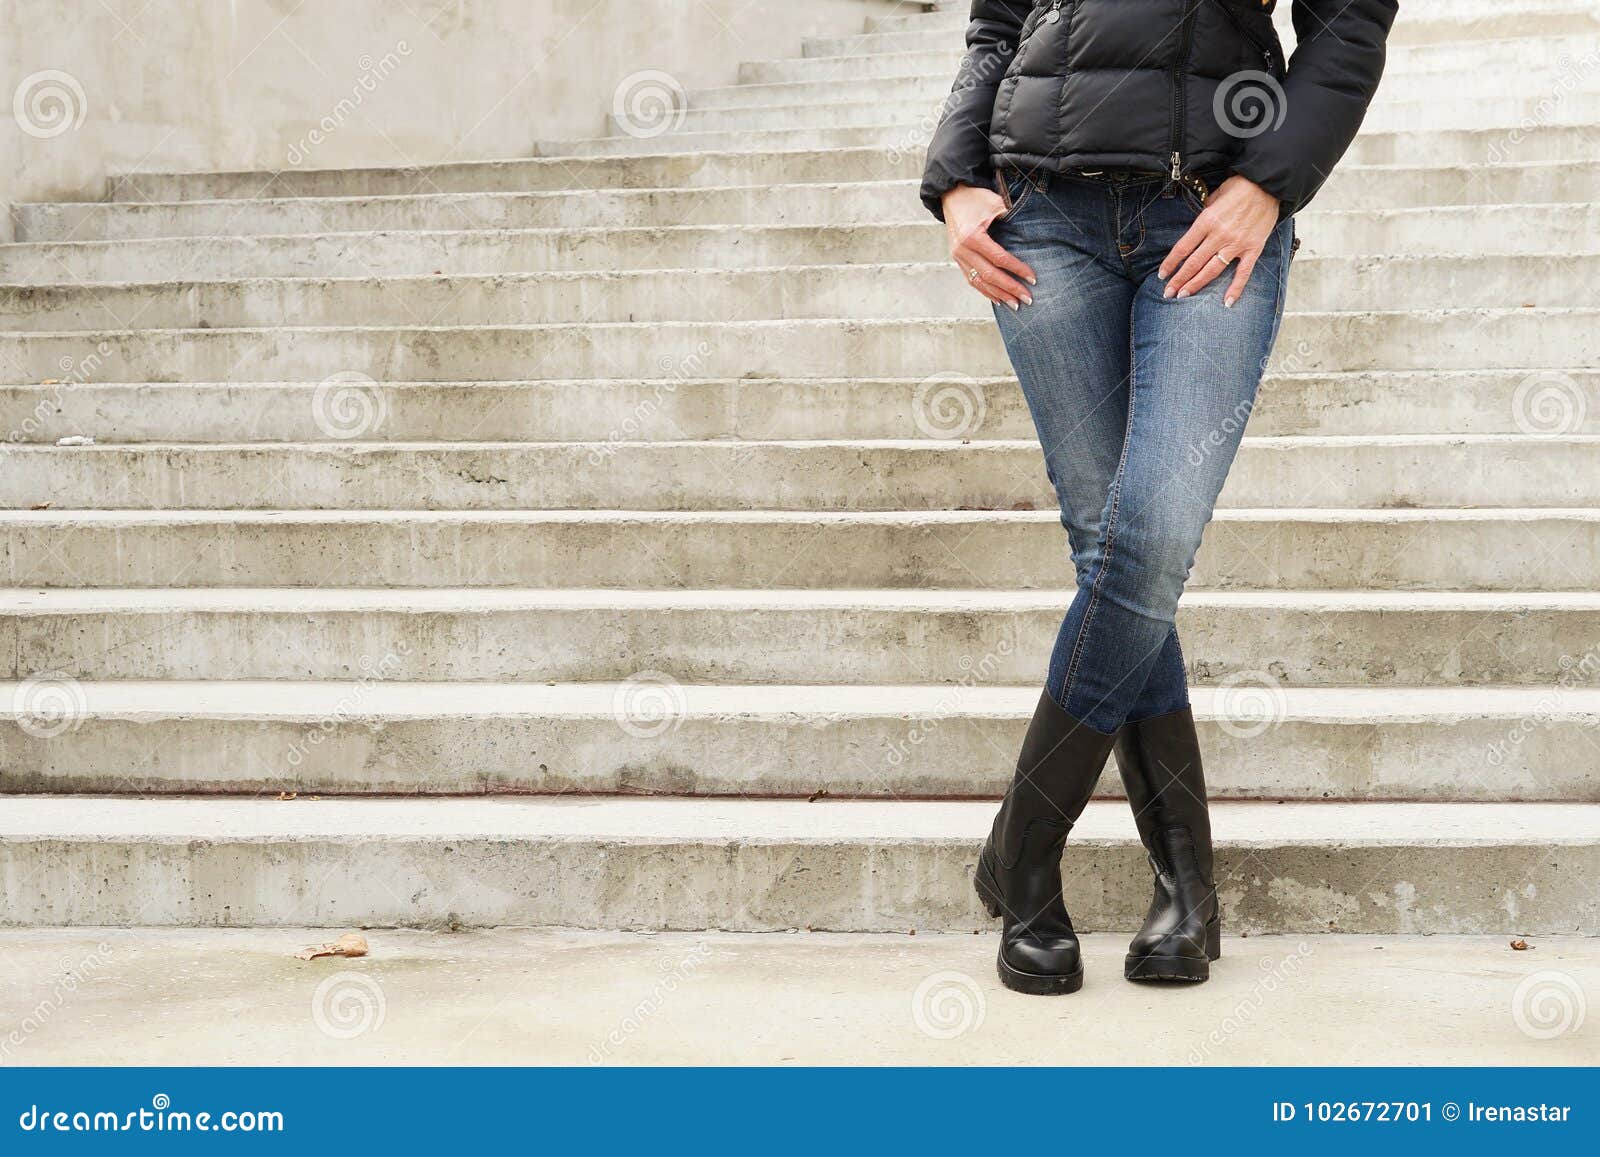 Women`s Legs in Jeans and Boots Stock Image - Image of space, person ...